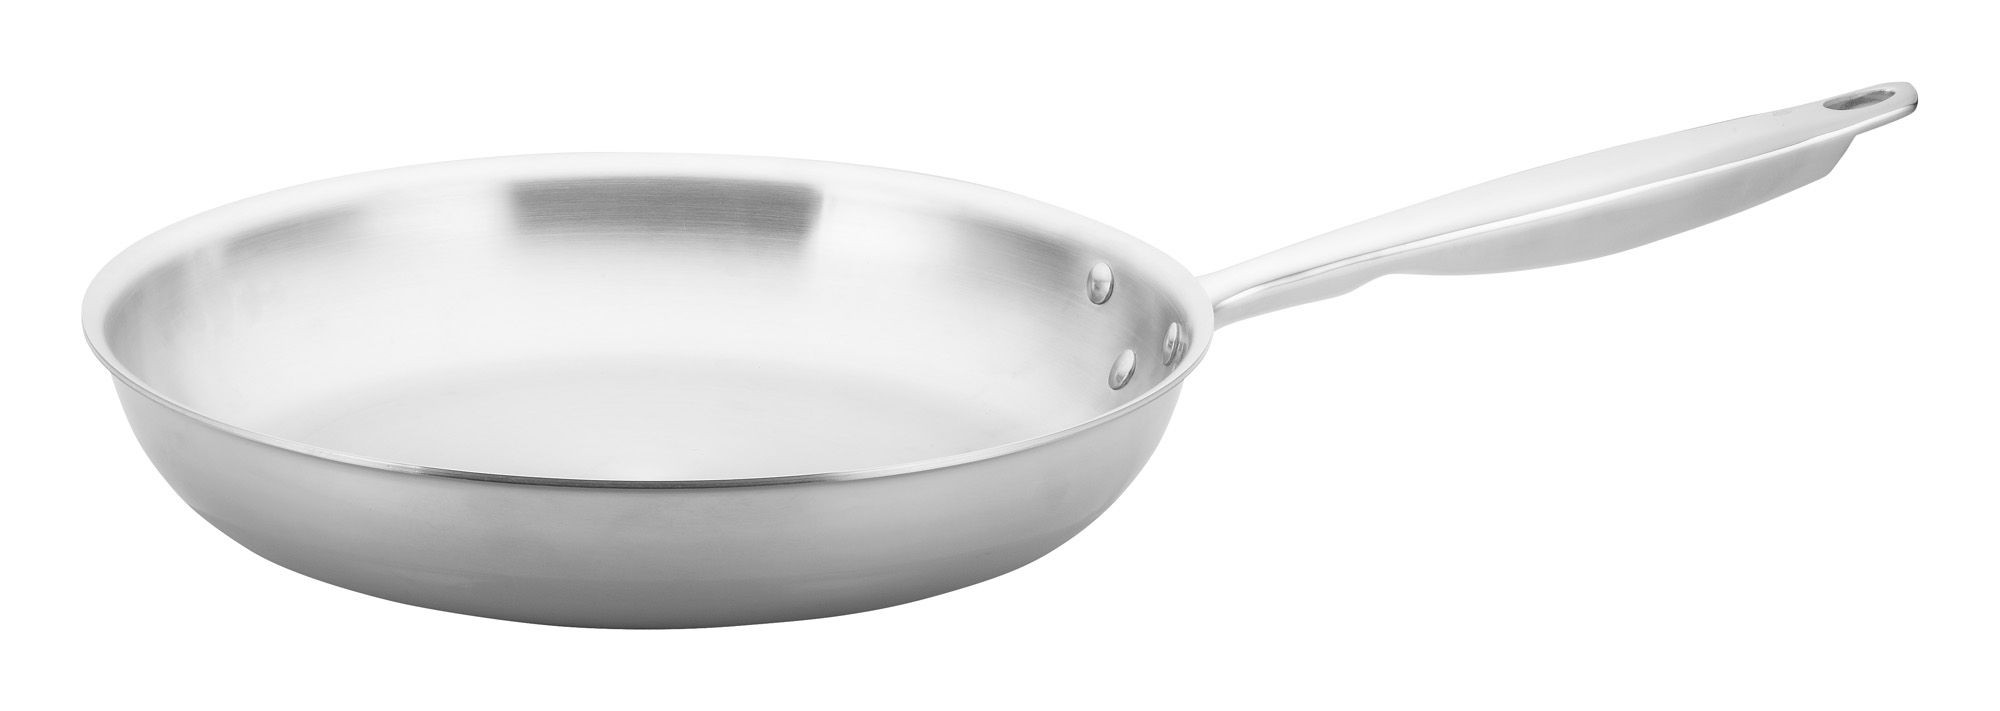 Winco TGFP-12 Tri-Ply Stainless Steel Natural Finish Fry Pan, 12"